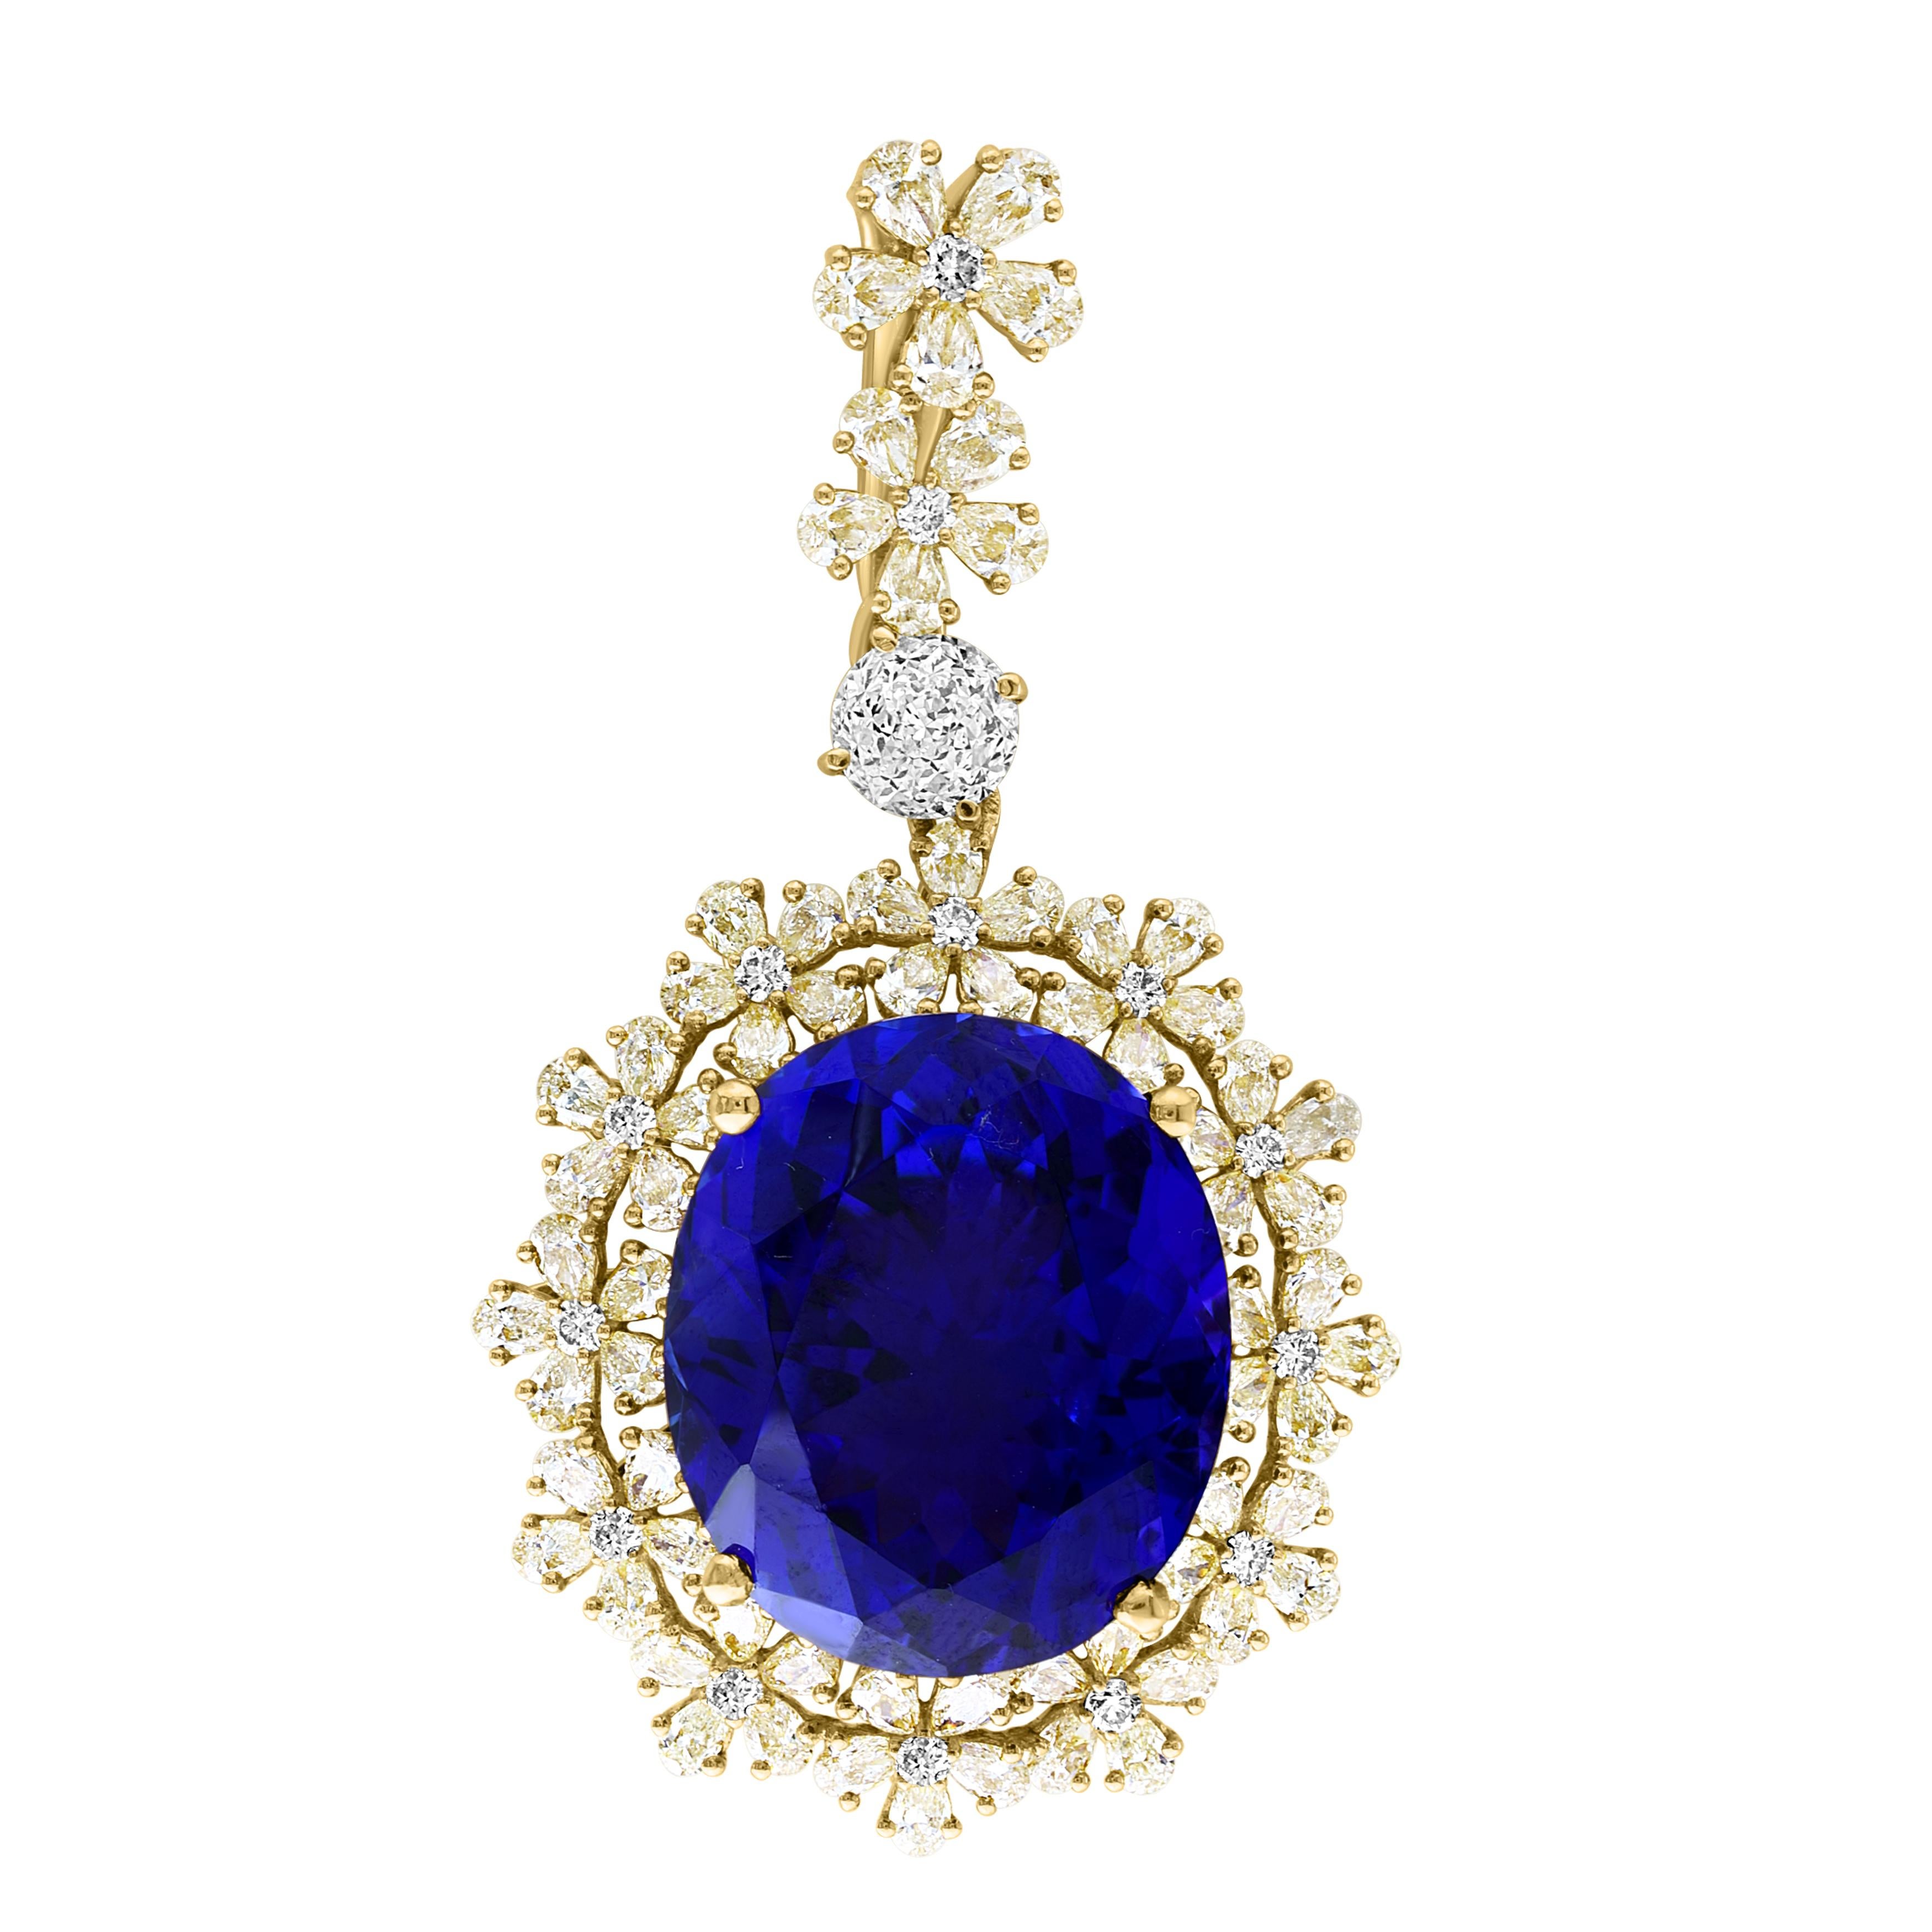 This extraordinary, 39.06 carat tanzanite is truly an extraordinary gemstone. There are  total  of 7 carats of shimmering white diamonds, this brilliant Oval-cut gem exhibits the rich violetish-blue color for which these stones are known and so